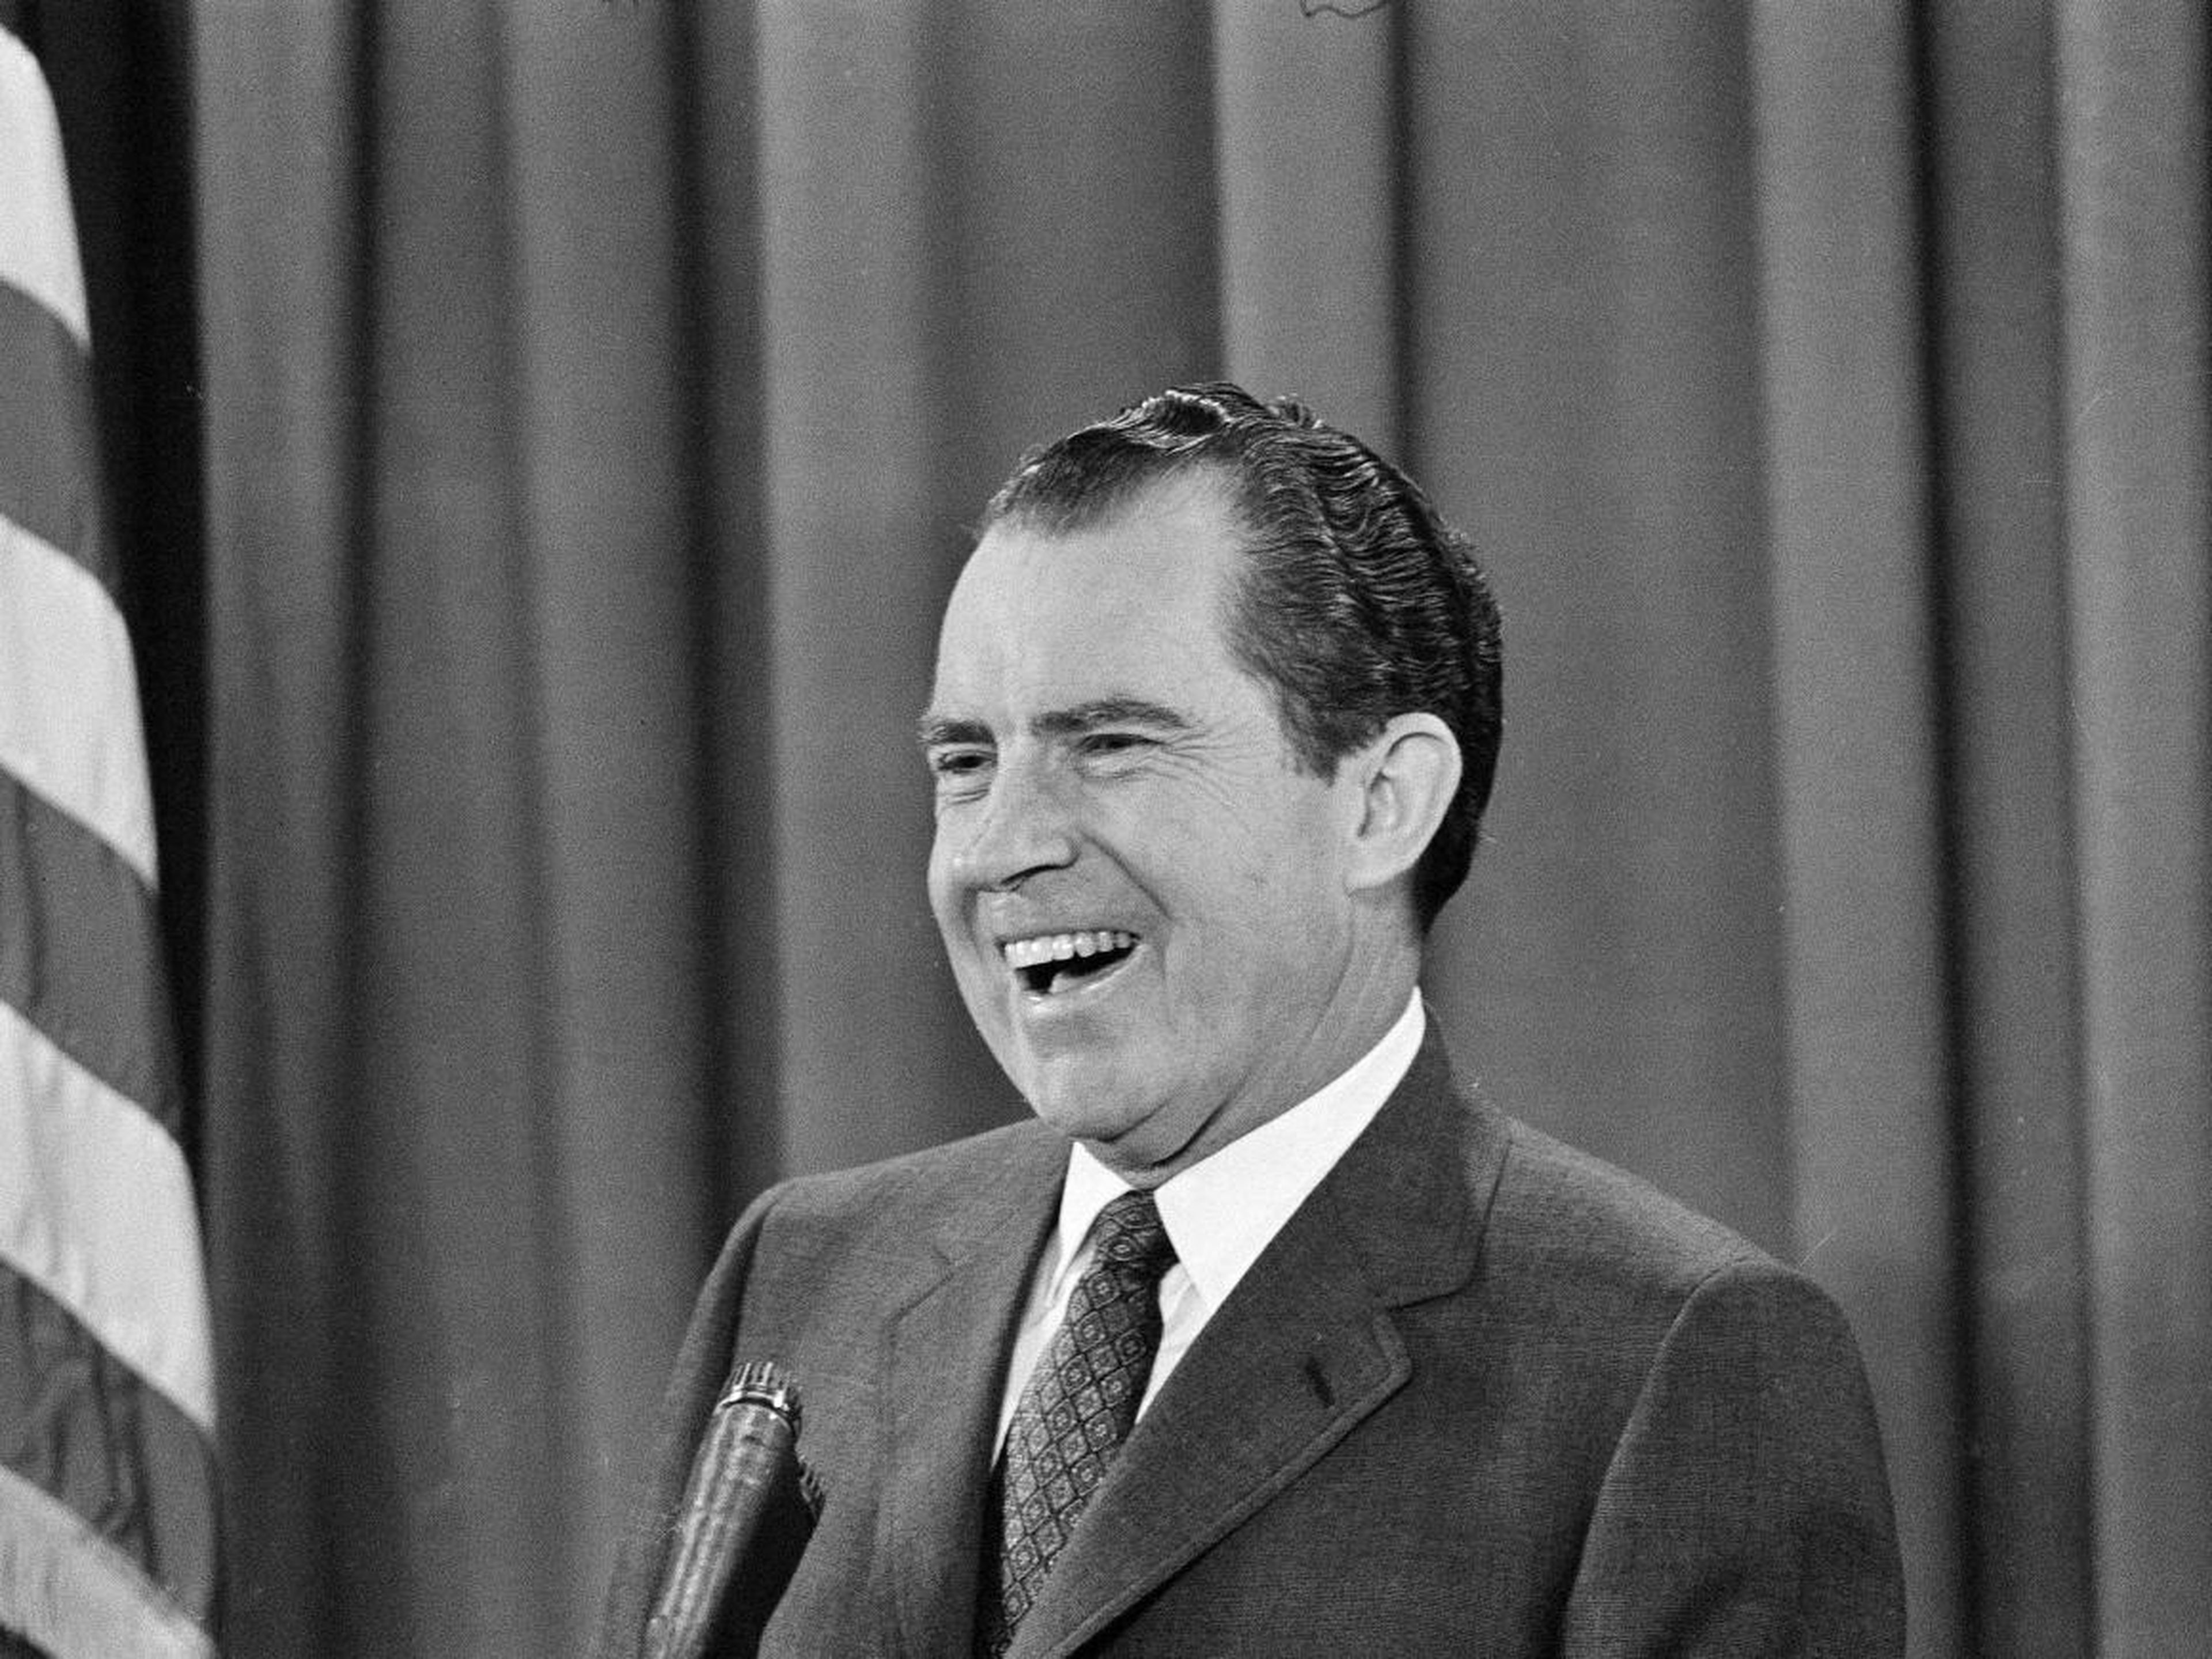 President Richard Nixon gave a press conference in the East Room of the White House several weeks after being sworn in in 1969.